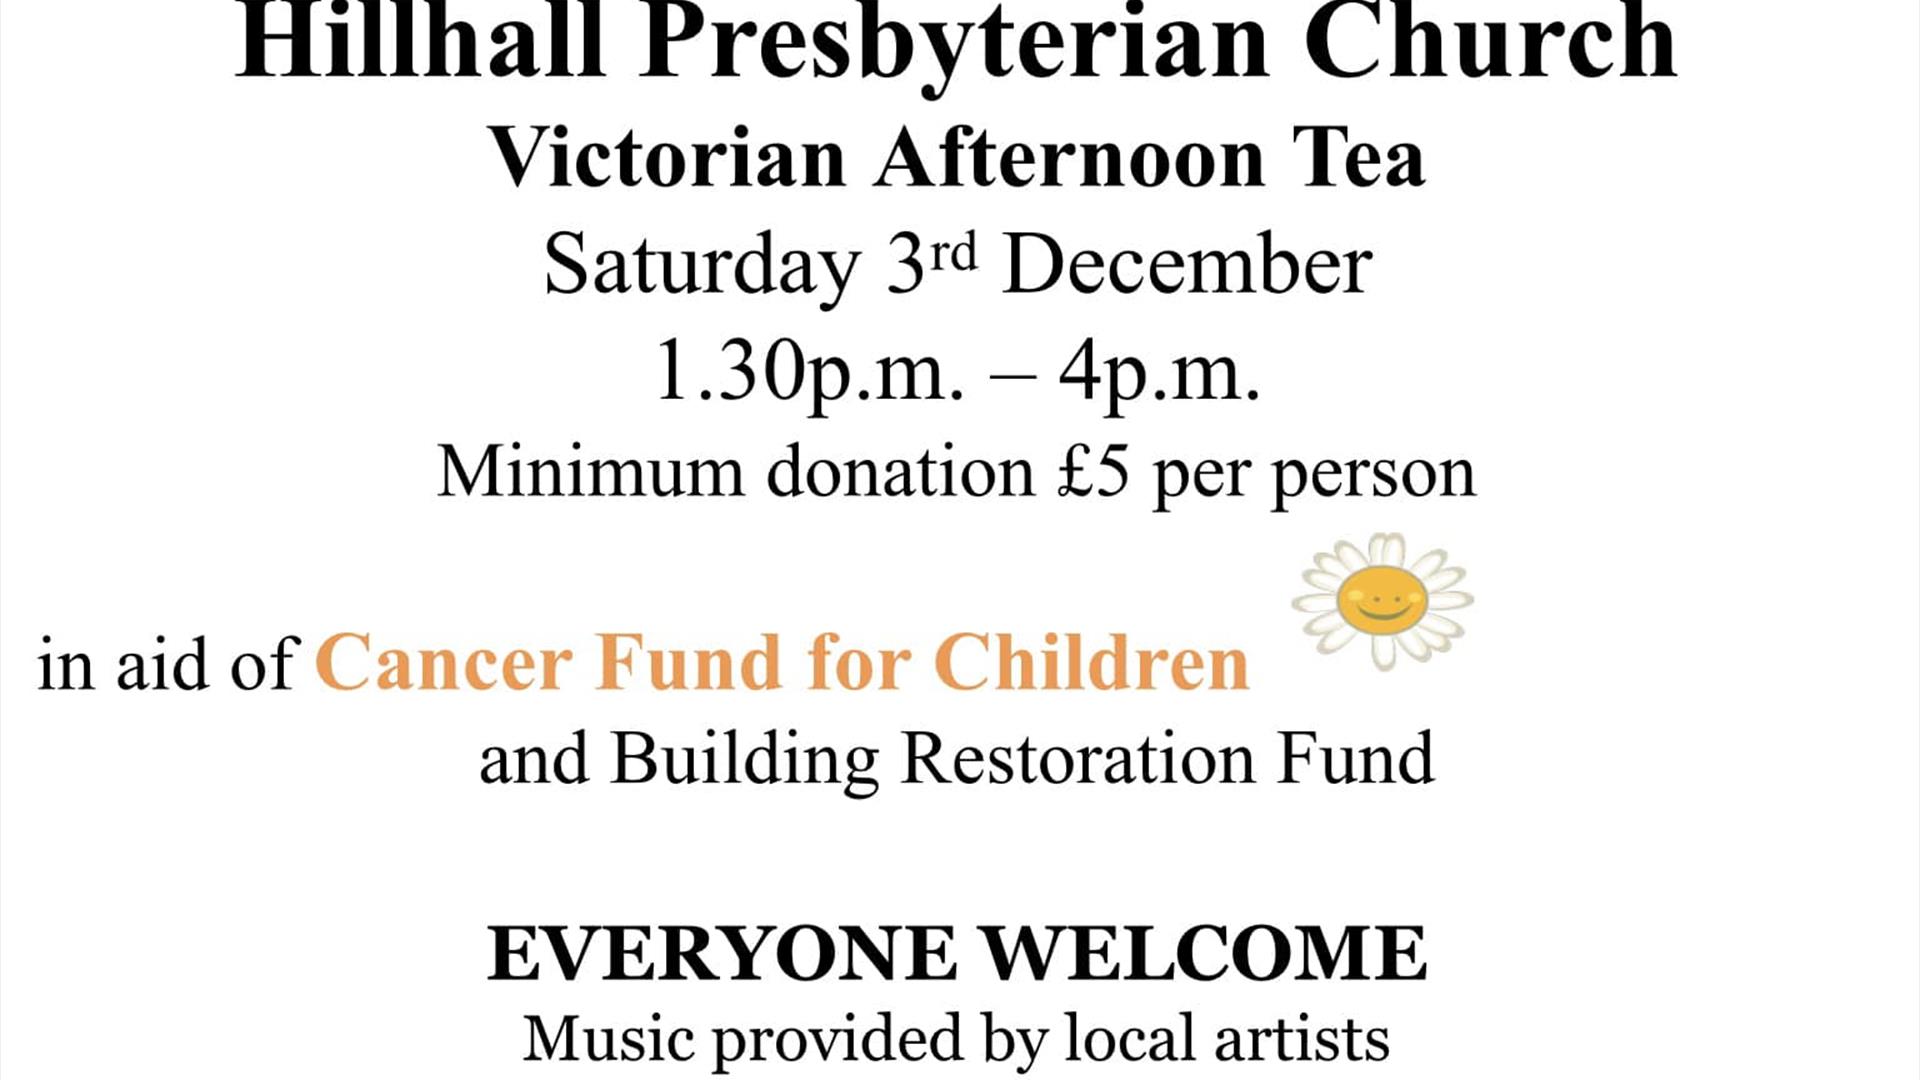 image is of poster with Christmas bells and Santa advertising Victorian Afternoon Tea at Hillhall Presbyterian Church